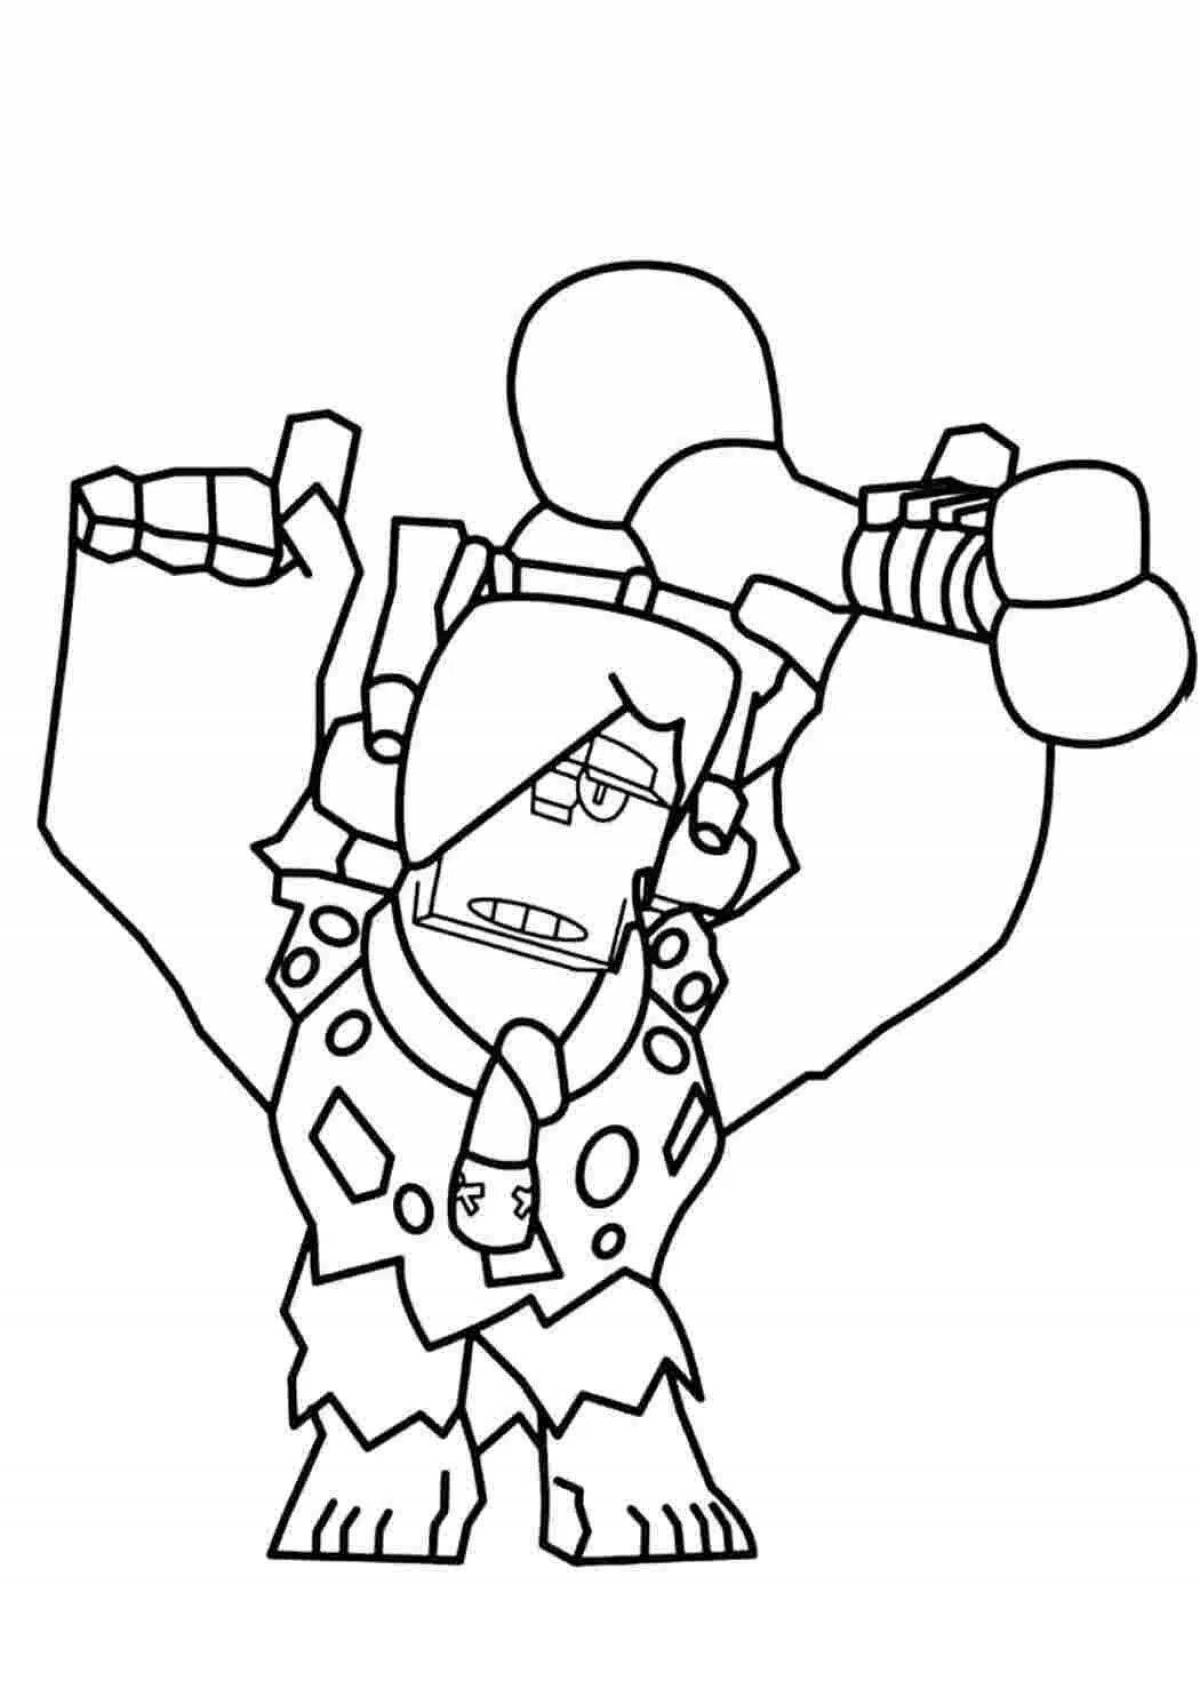 Dazzling brawl stars skin coloring pages